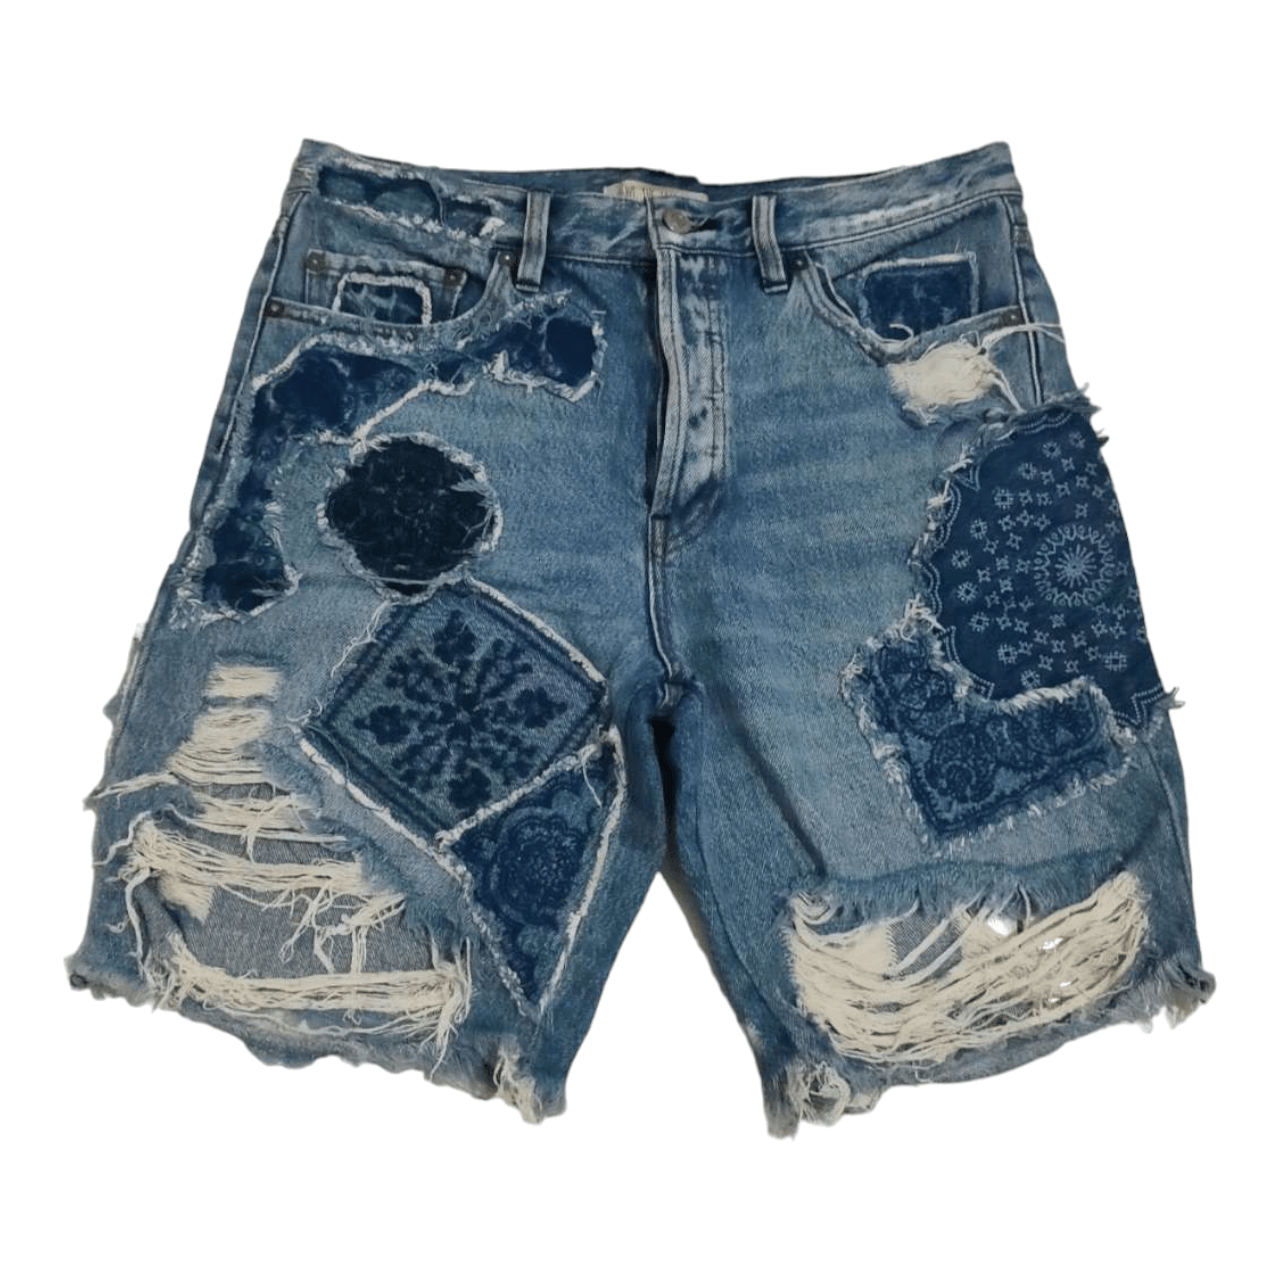 Free People Blue Ripped Short Pants